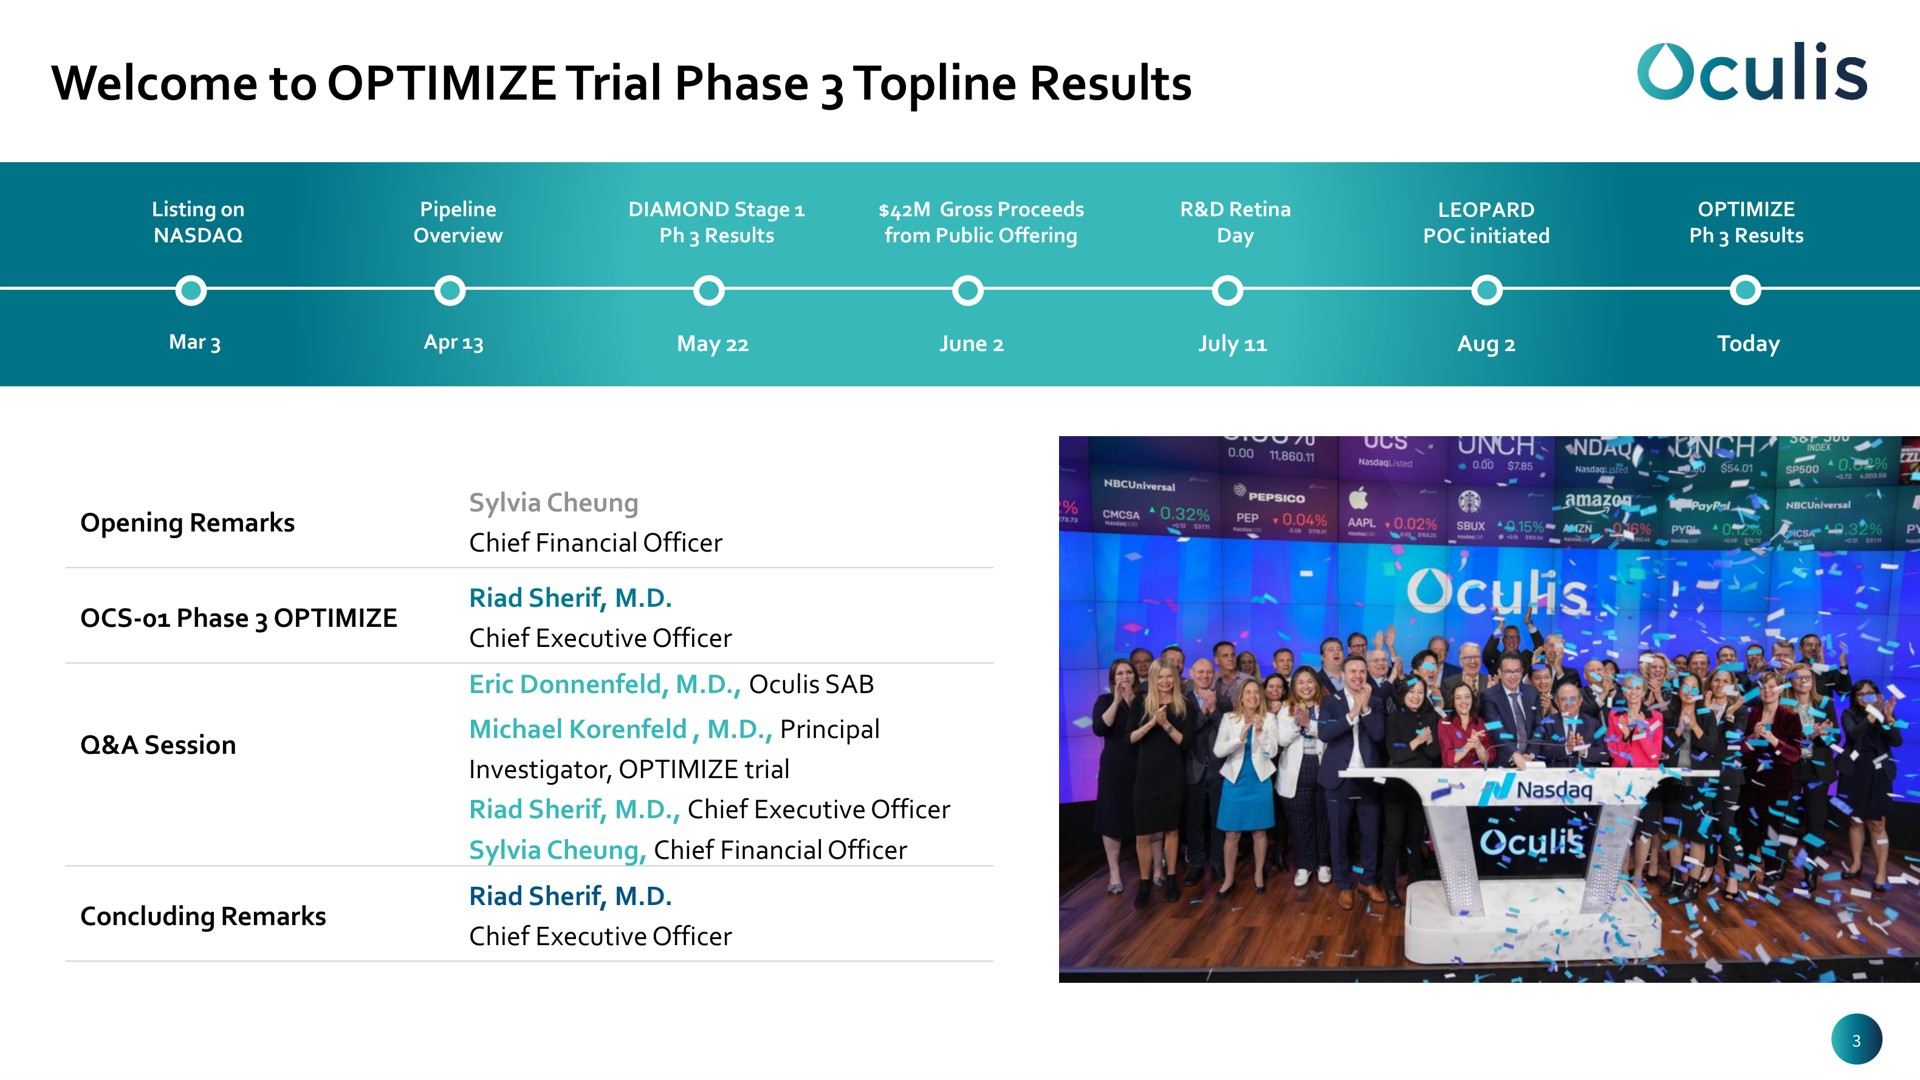 welcome to optimize trial phase topline results | Oculis